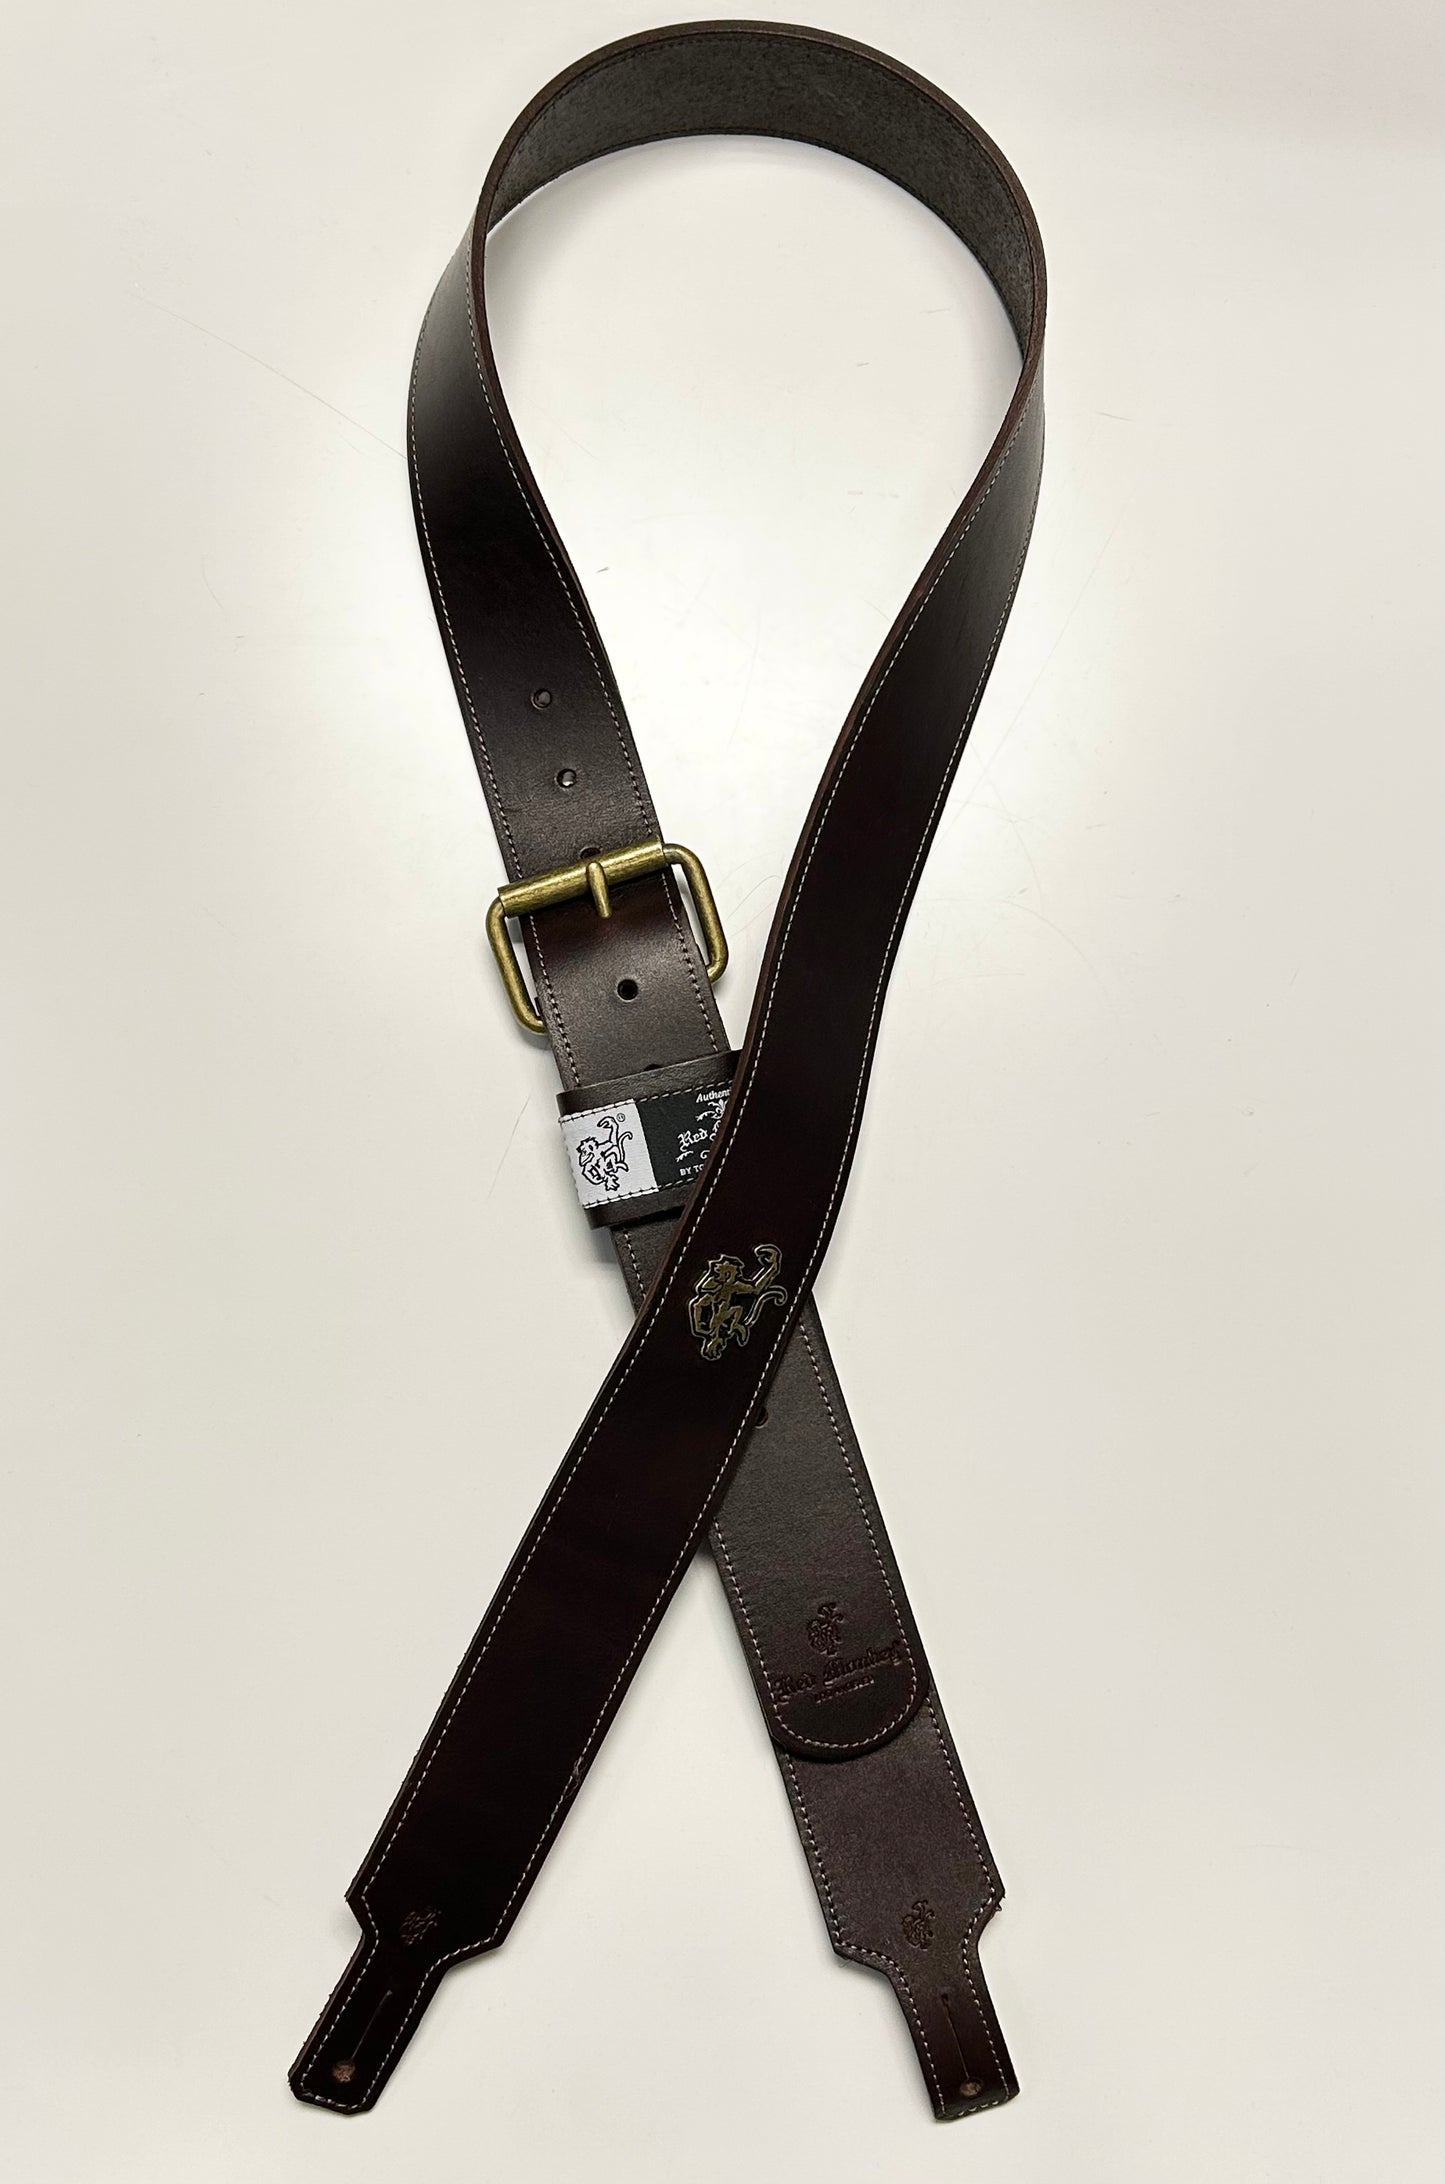 Red Monkey Designs 2" Classic Guitar Strap (Chocolate/Antique Brass, Size:2)